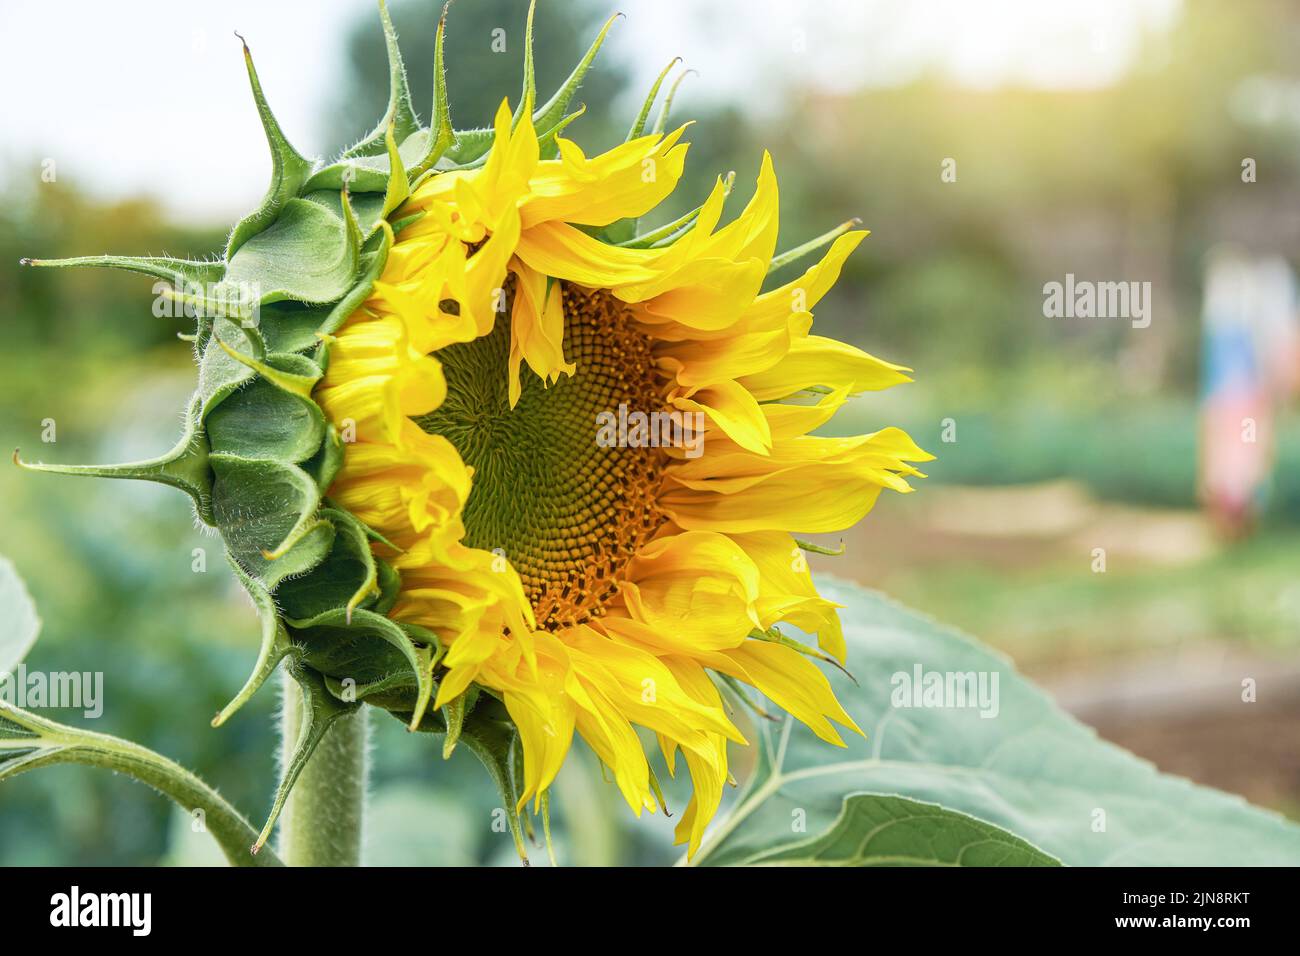 Sunflower with bright yellow petals disk floret and green leaves on blurred background. Beautiful plant grows in agricultural field closeup Stock Photo